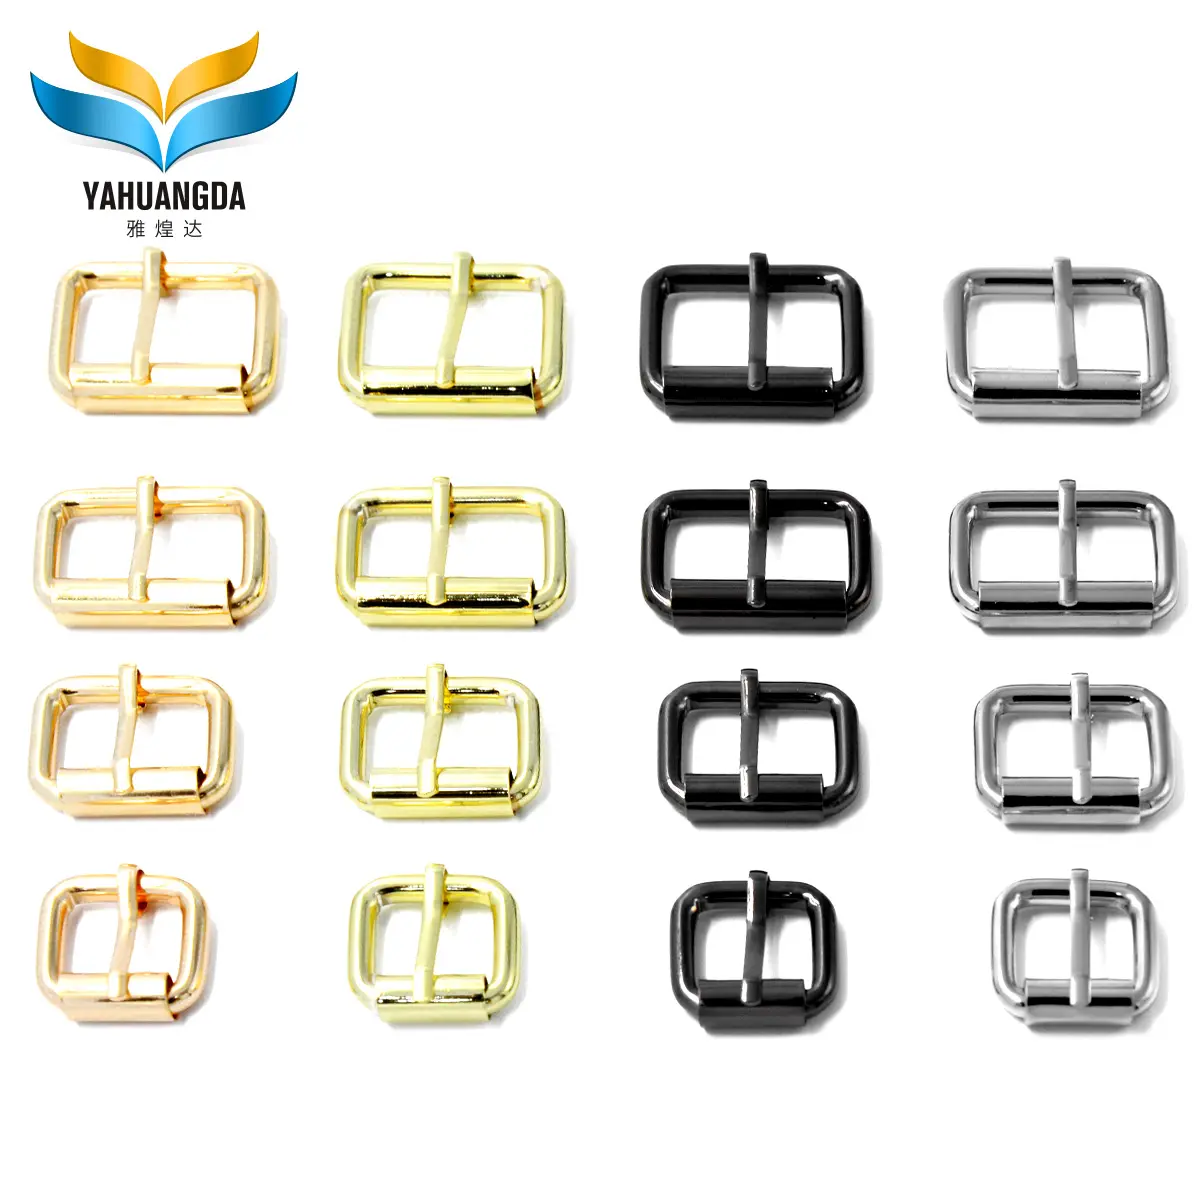 Fashionable Metal Roller Buckle Bag Belt Straps Accessory Lock Pin Clip Square Handbag Hardware Buckle For Leather Fitting TZ48